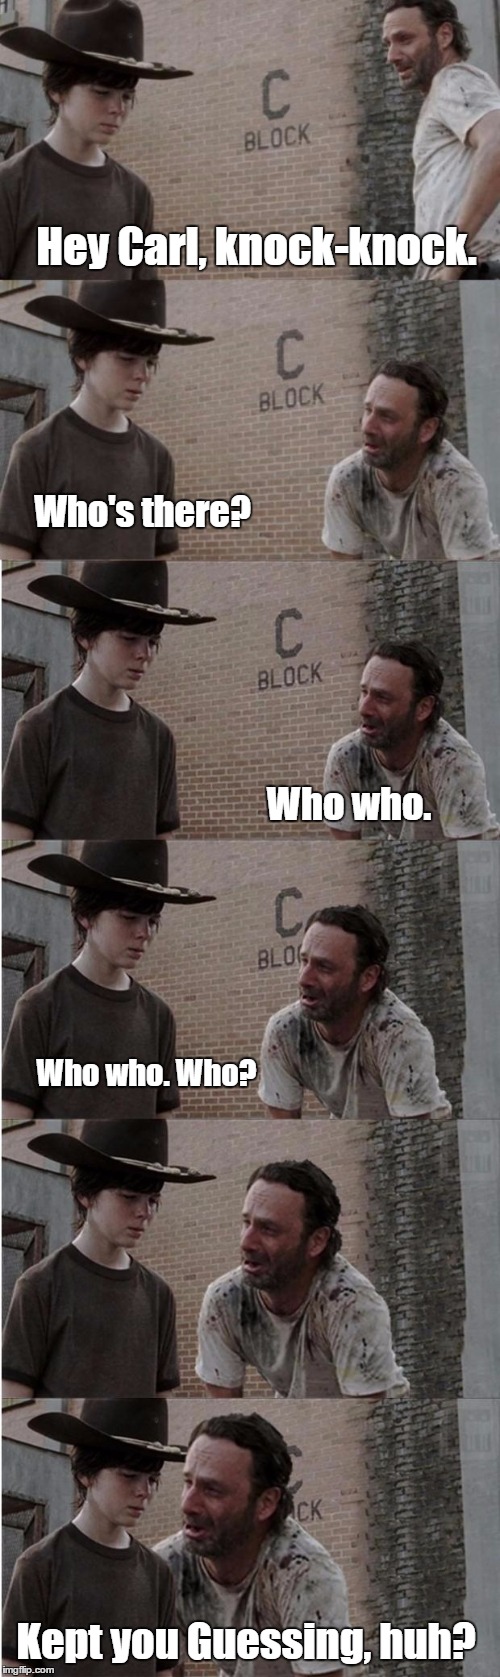 Rick and Carl Longer Meme | Hey Carl, knock-knock. Who's there? Who who. Who who. Who? Kept you Guessing, huh? | image tagged in memes,rick and carl longer | made w/ Imgflip meme maker